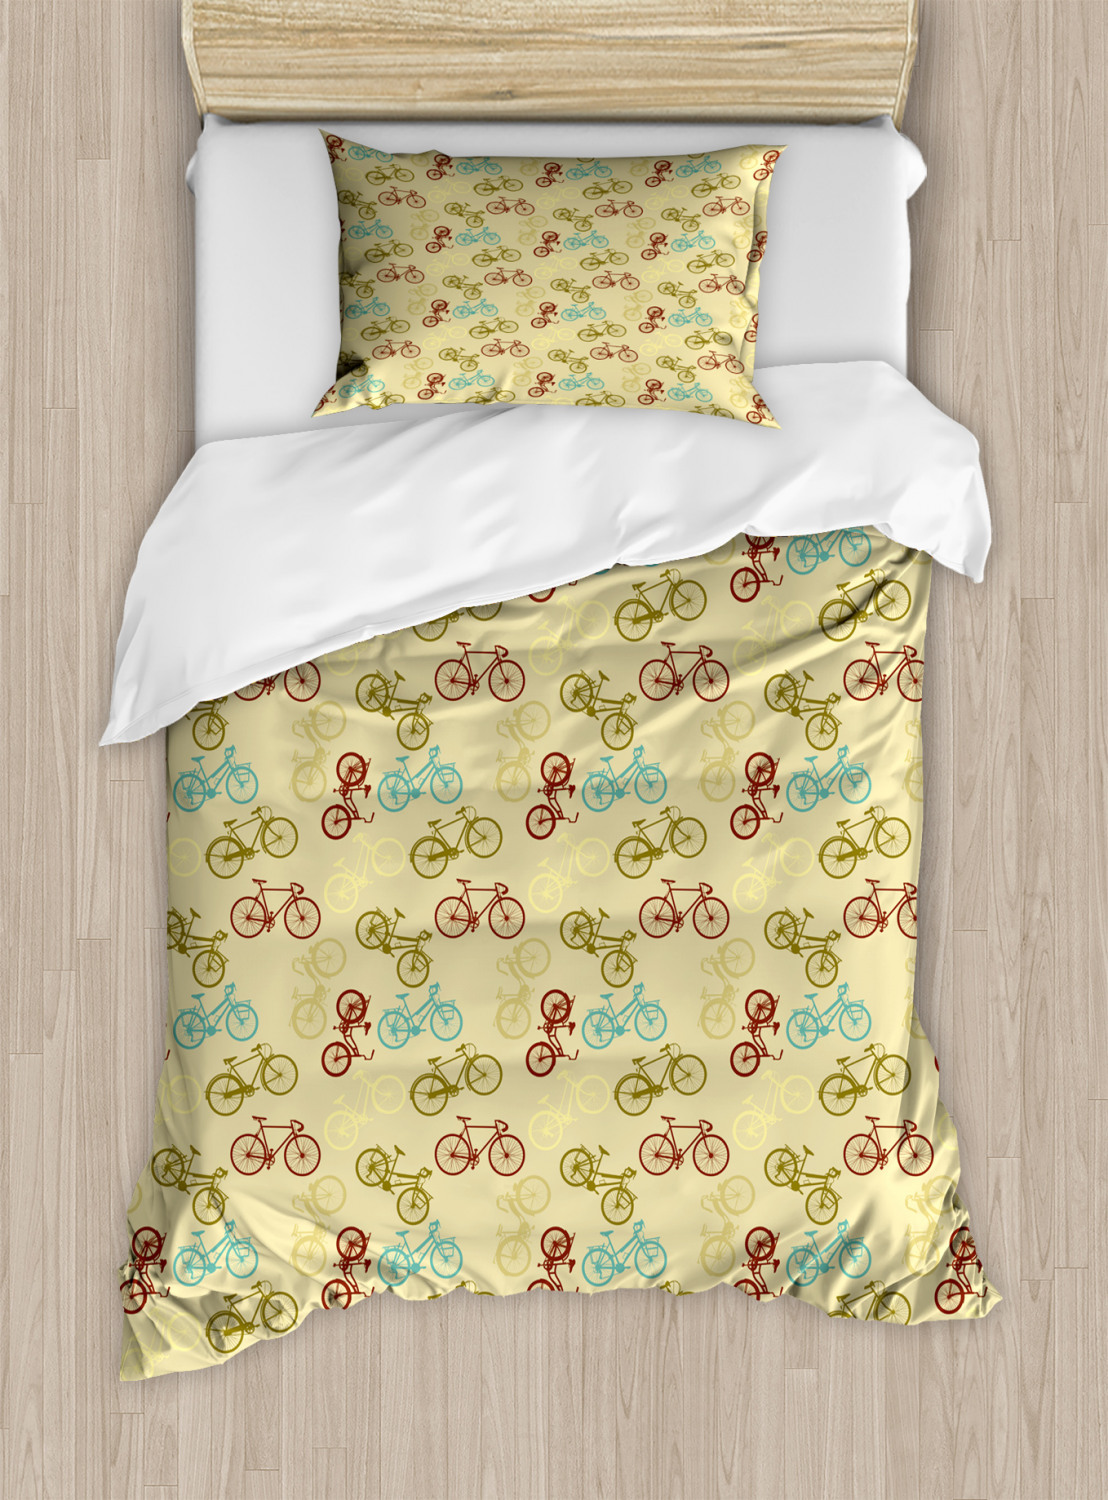 Vintage Duvet Cover Set with Pillow Shams Bicycle with Flowers Print 